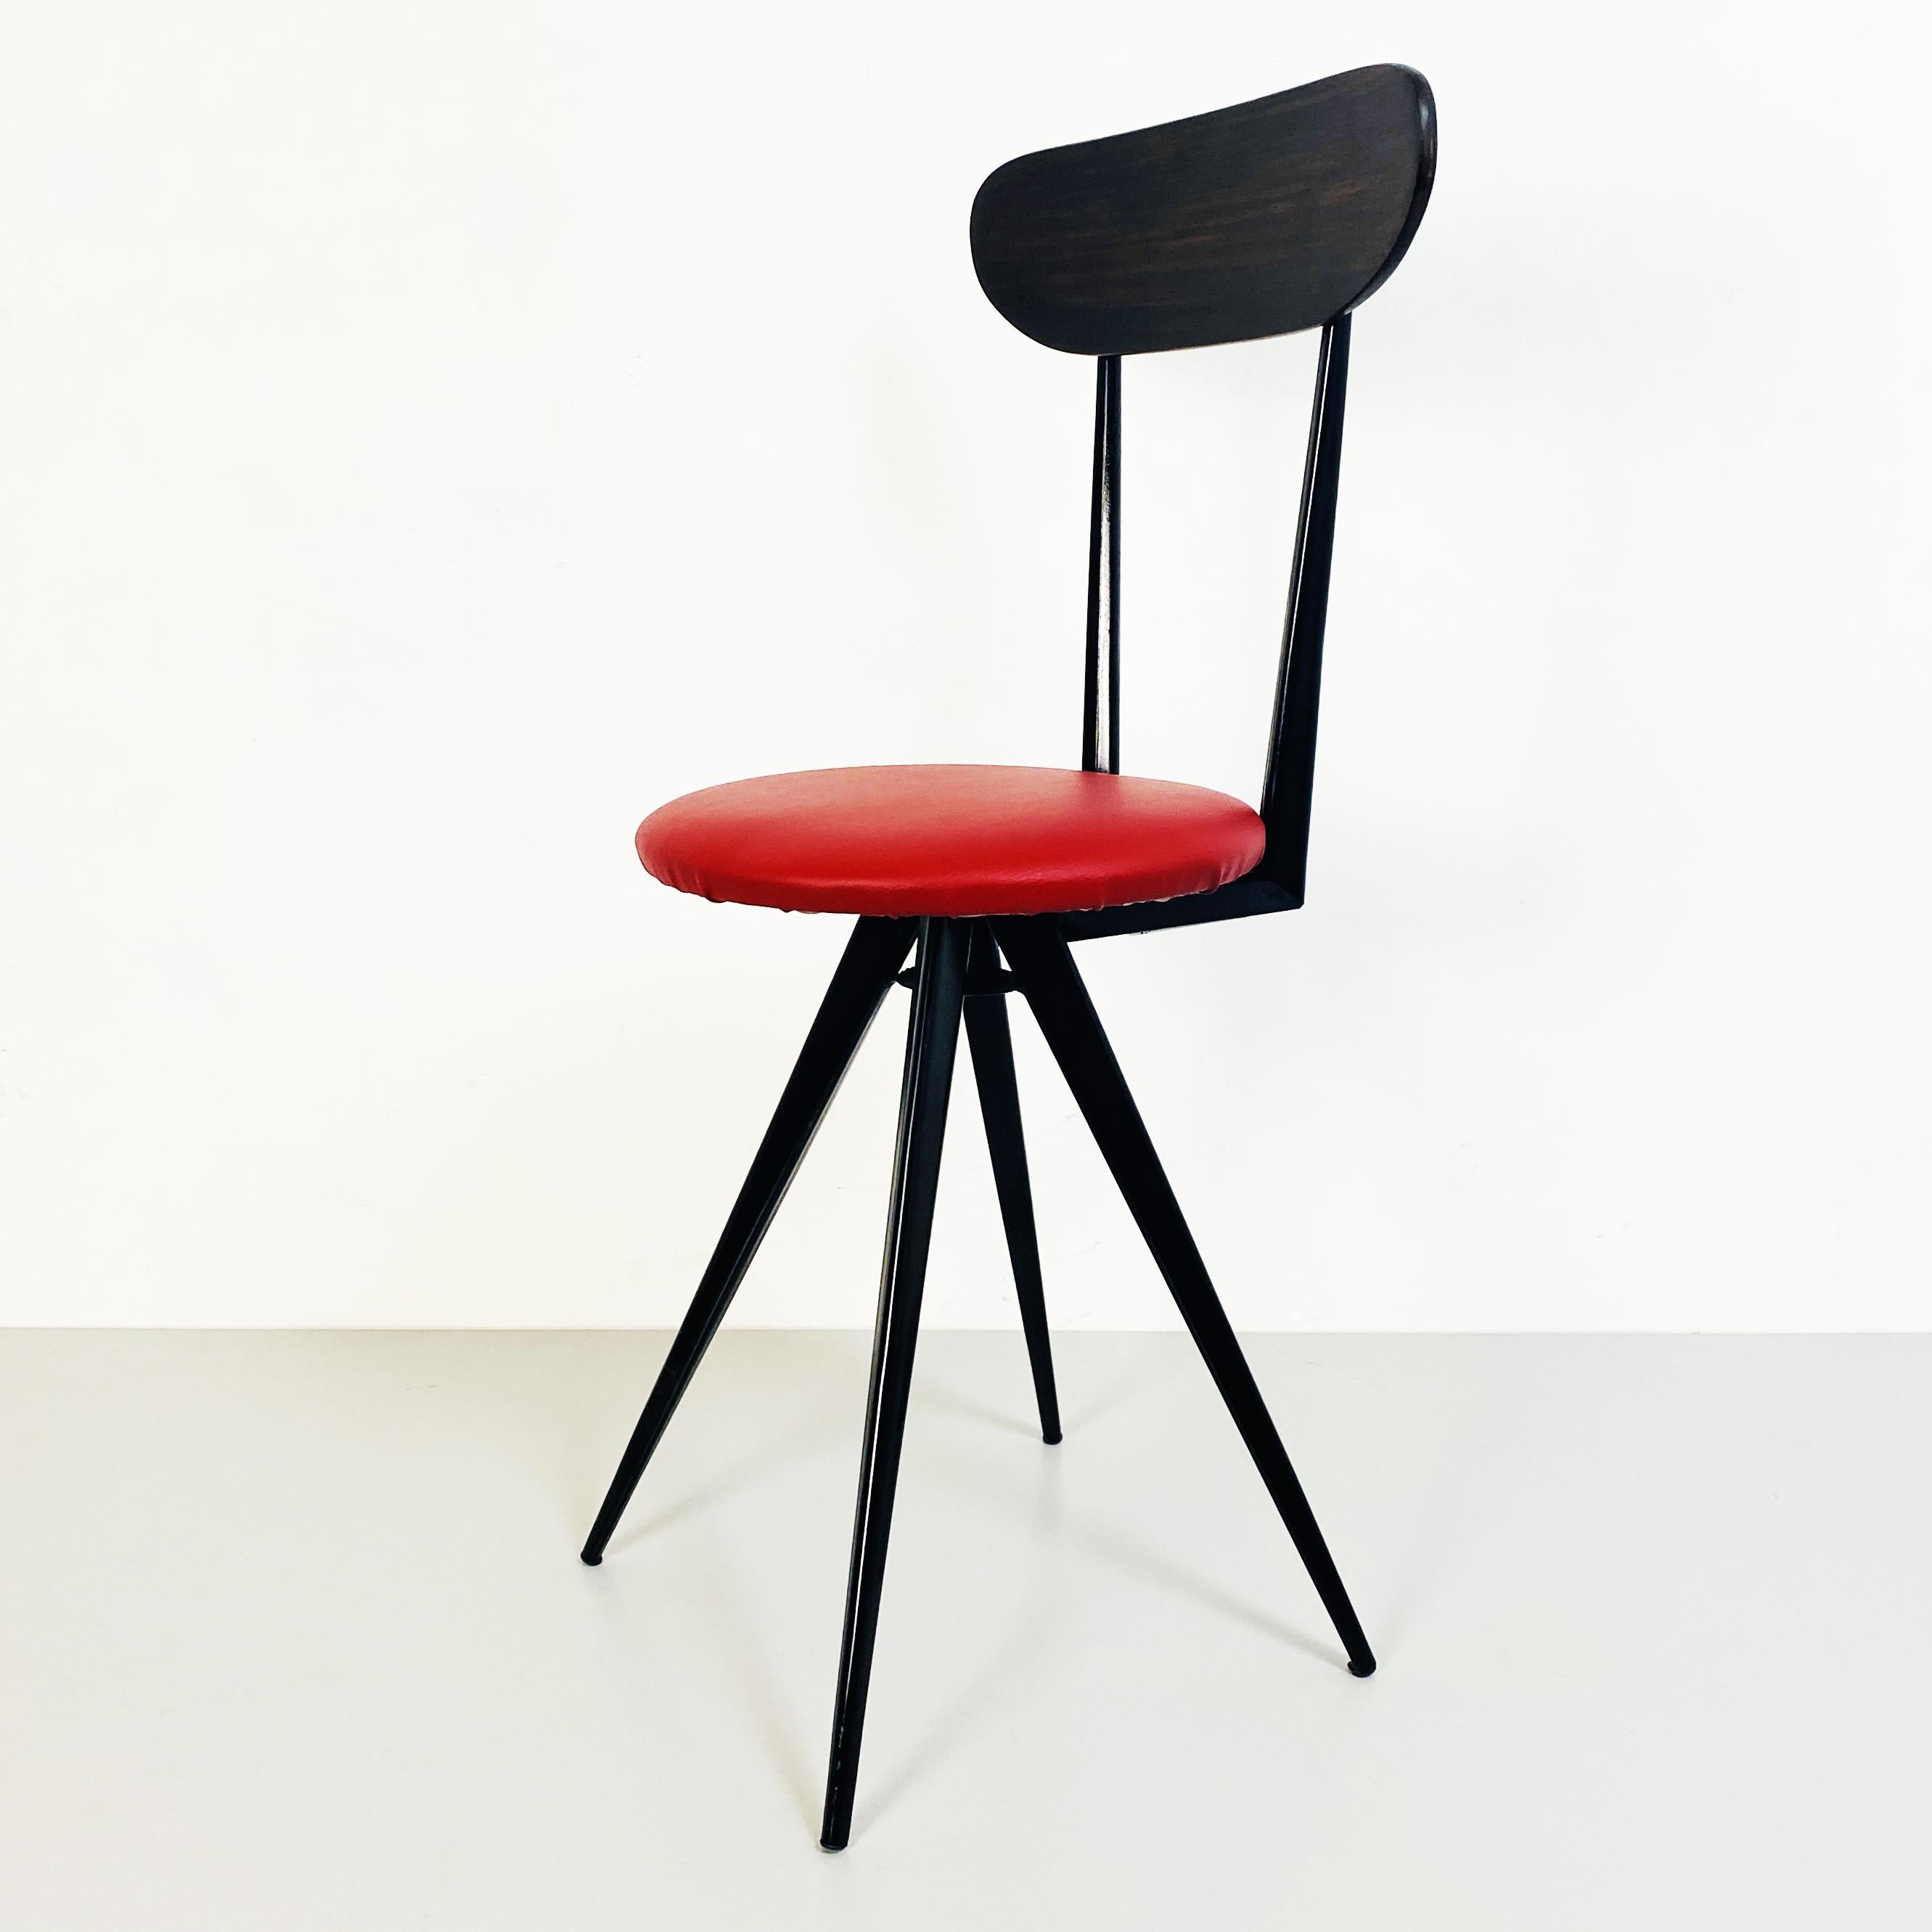 Italian Mid-Century Chair with Red Sky Seat, Metal and Wooded Structure, 1960s 2